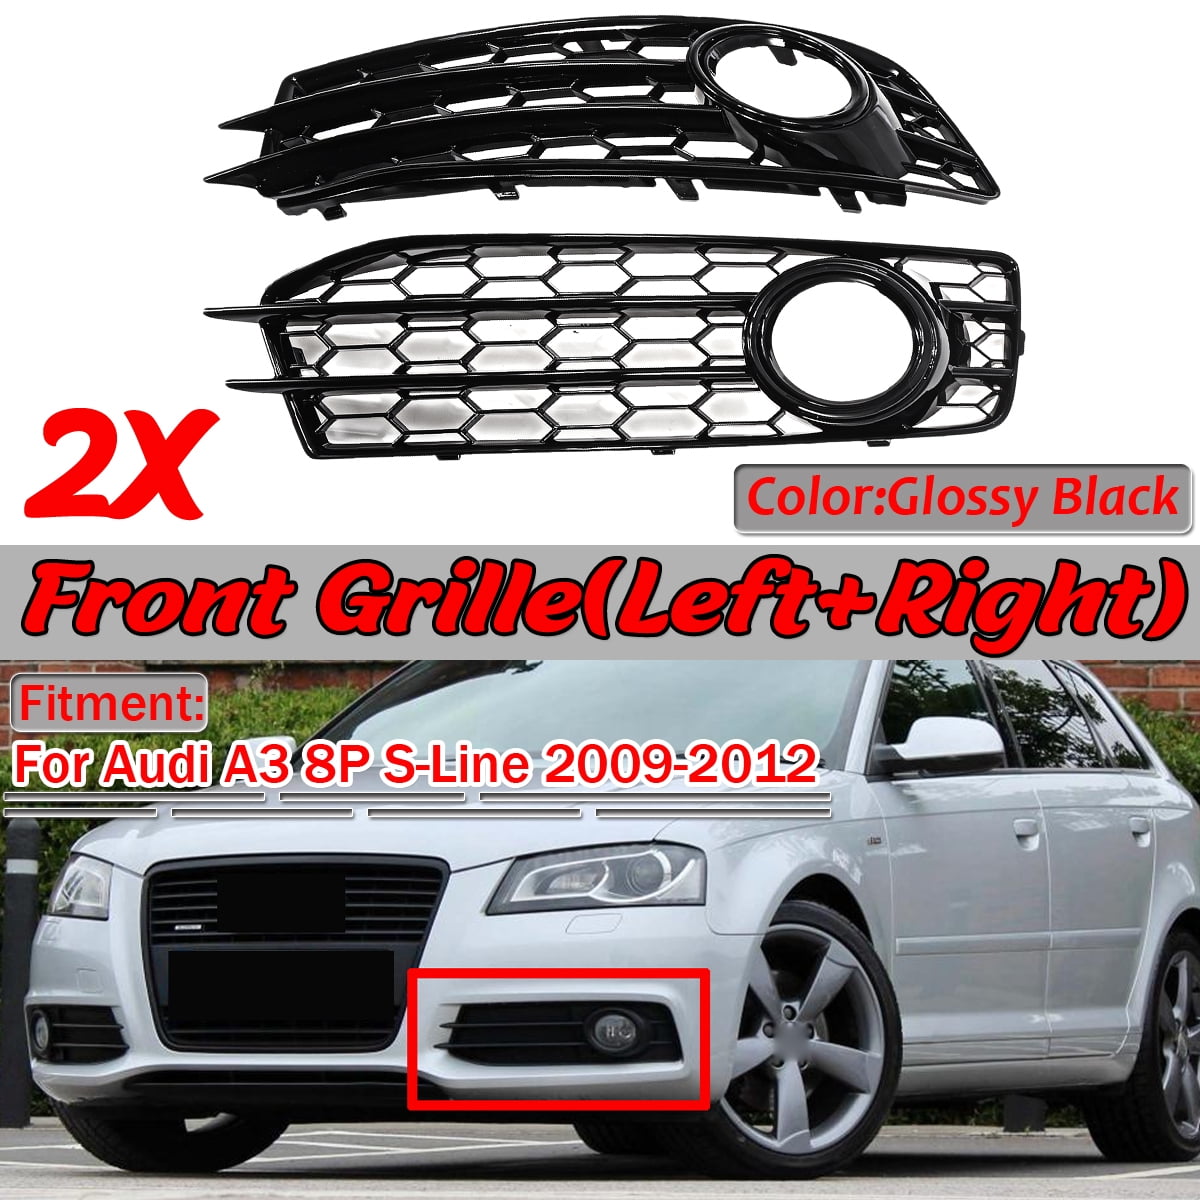 LH Chrome Honey Comb Fog Light Cover Grille Grills For Audi A4 B8 2009-2012 EE